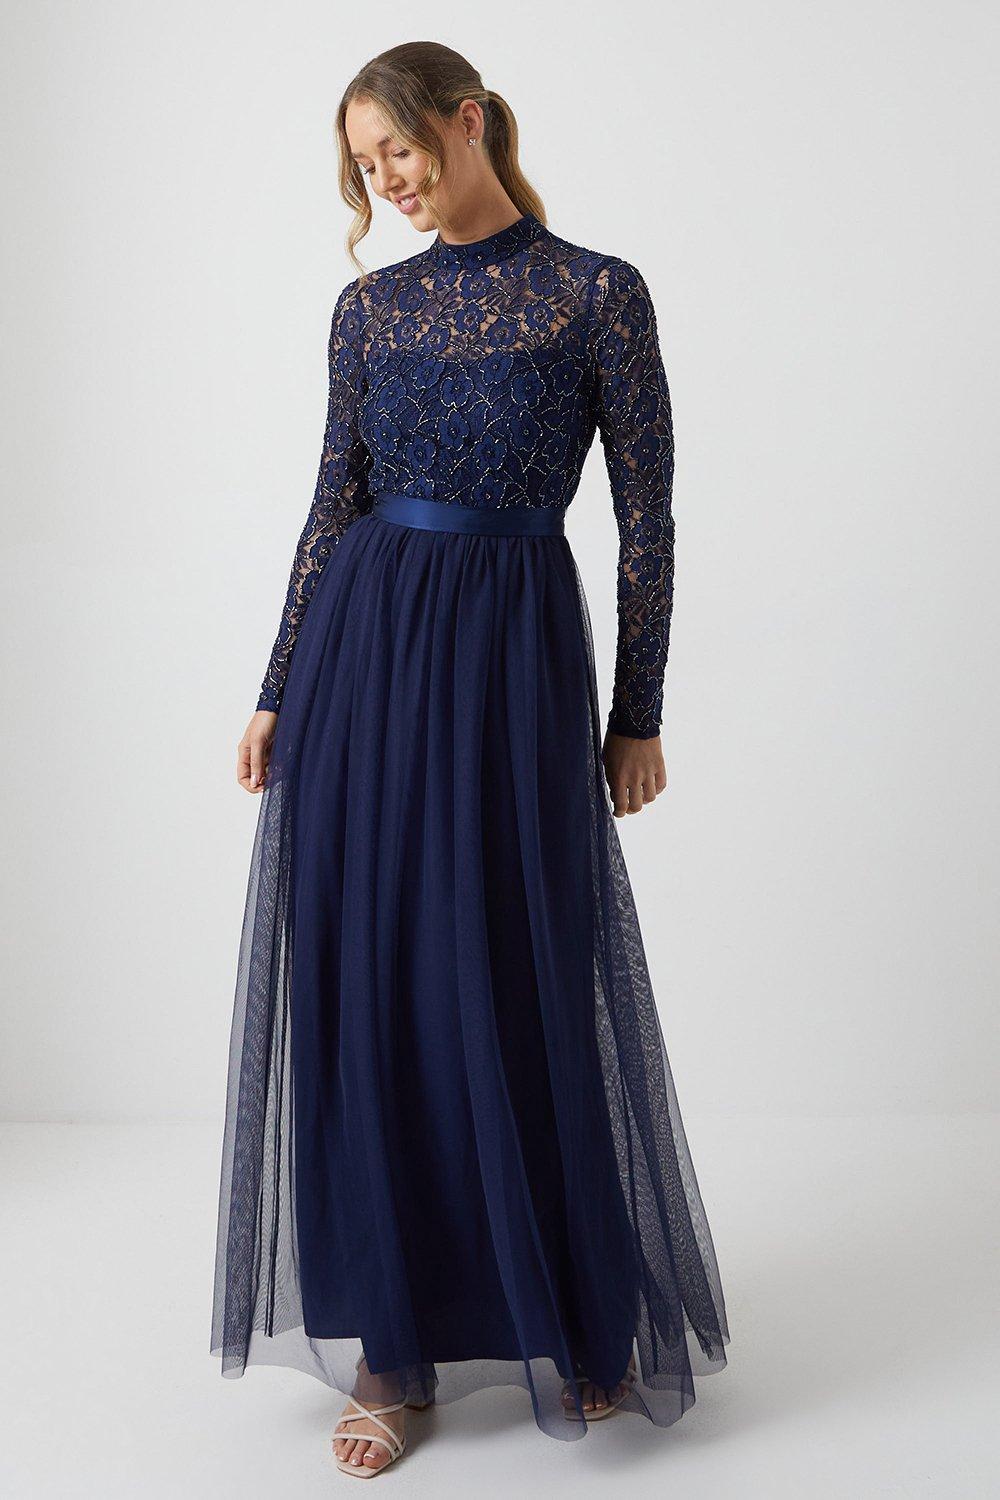 Embellished Lace Two In One Bridesmaids Dress - Navy